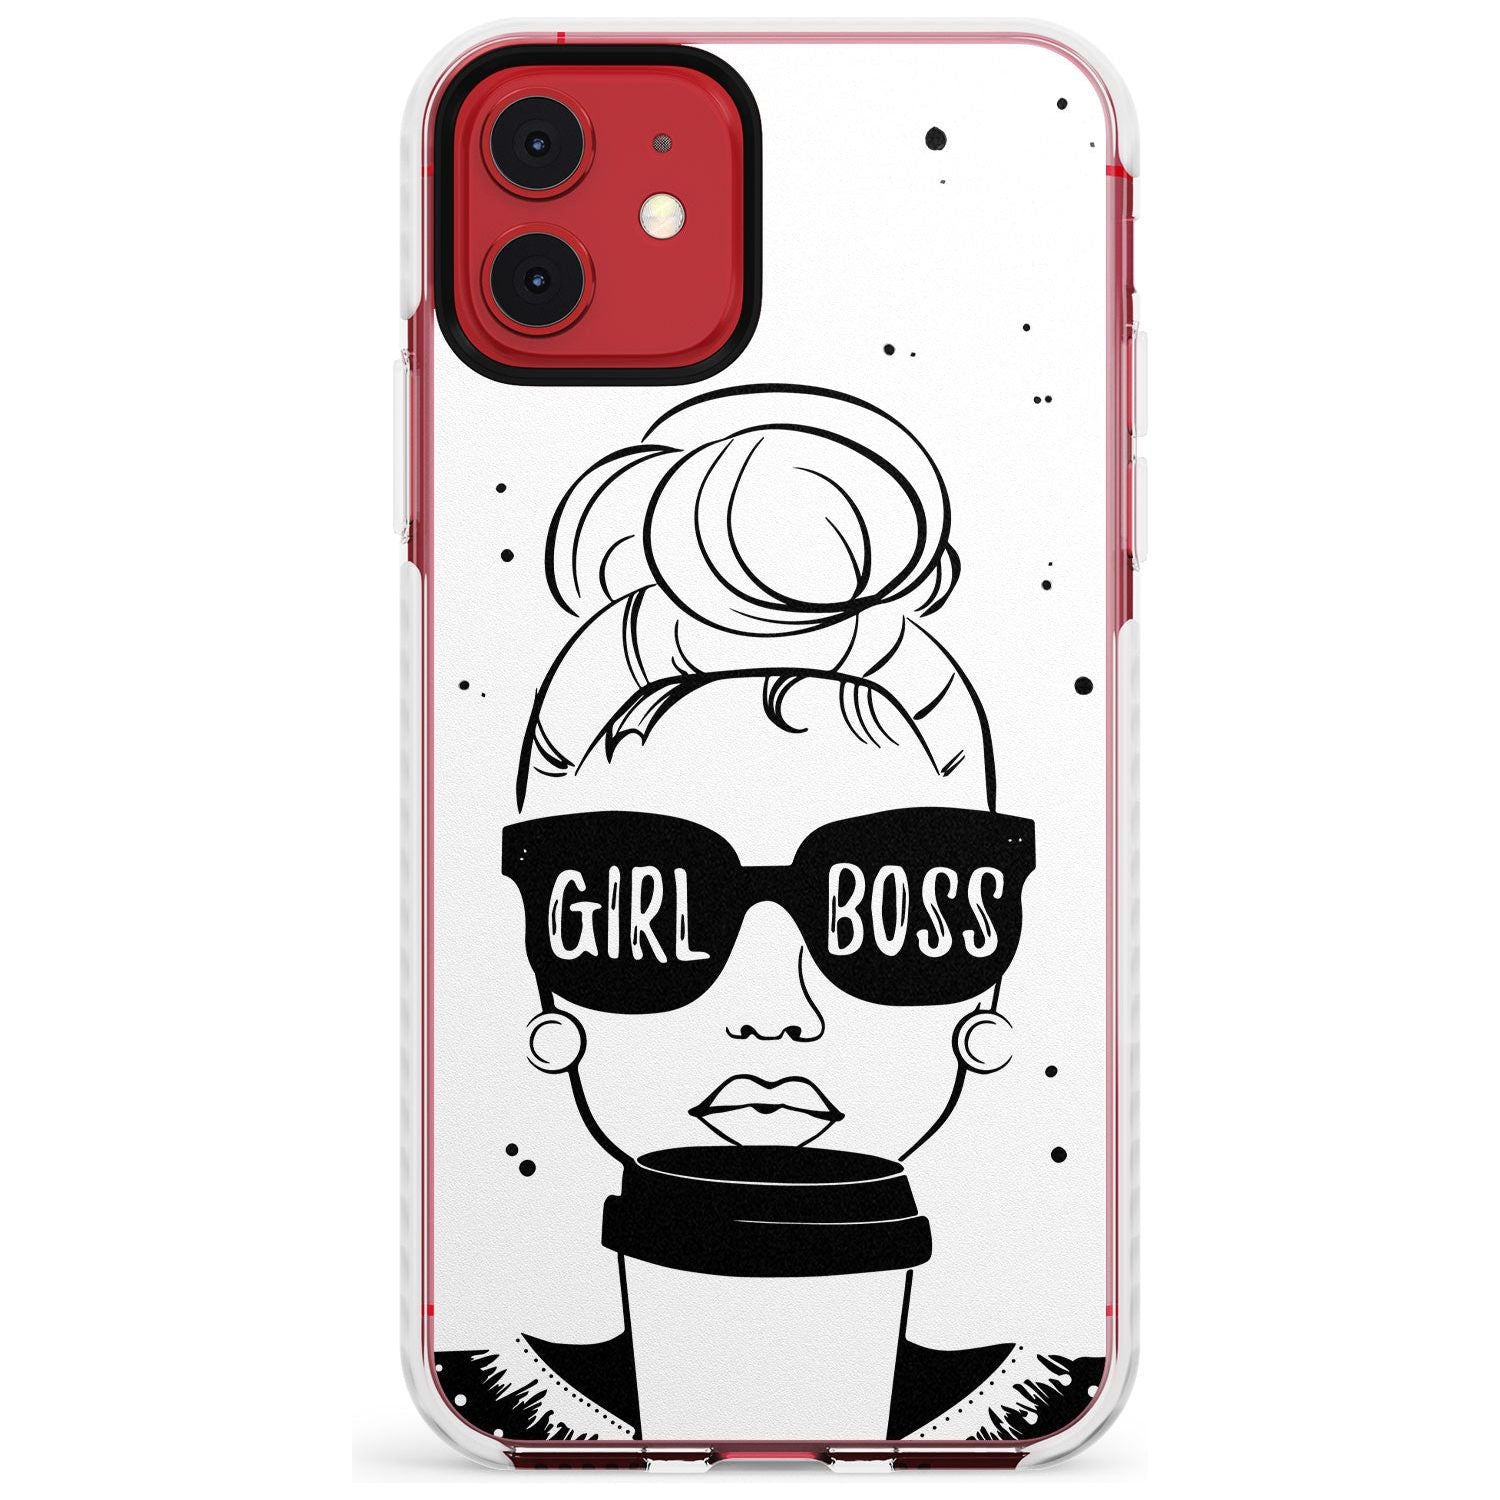 Girl Boss Impact Phone Case for iPhone 11